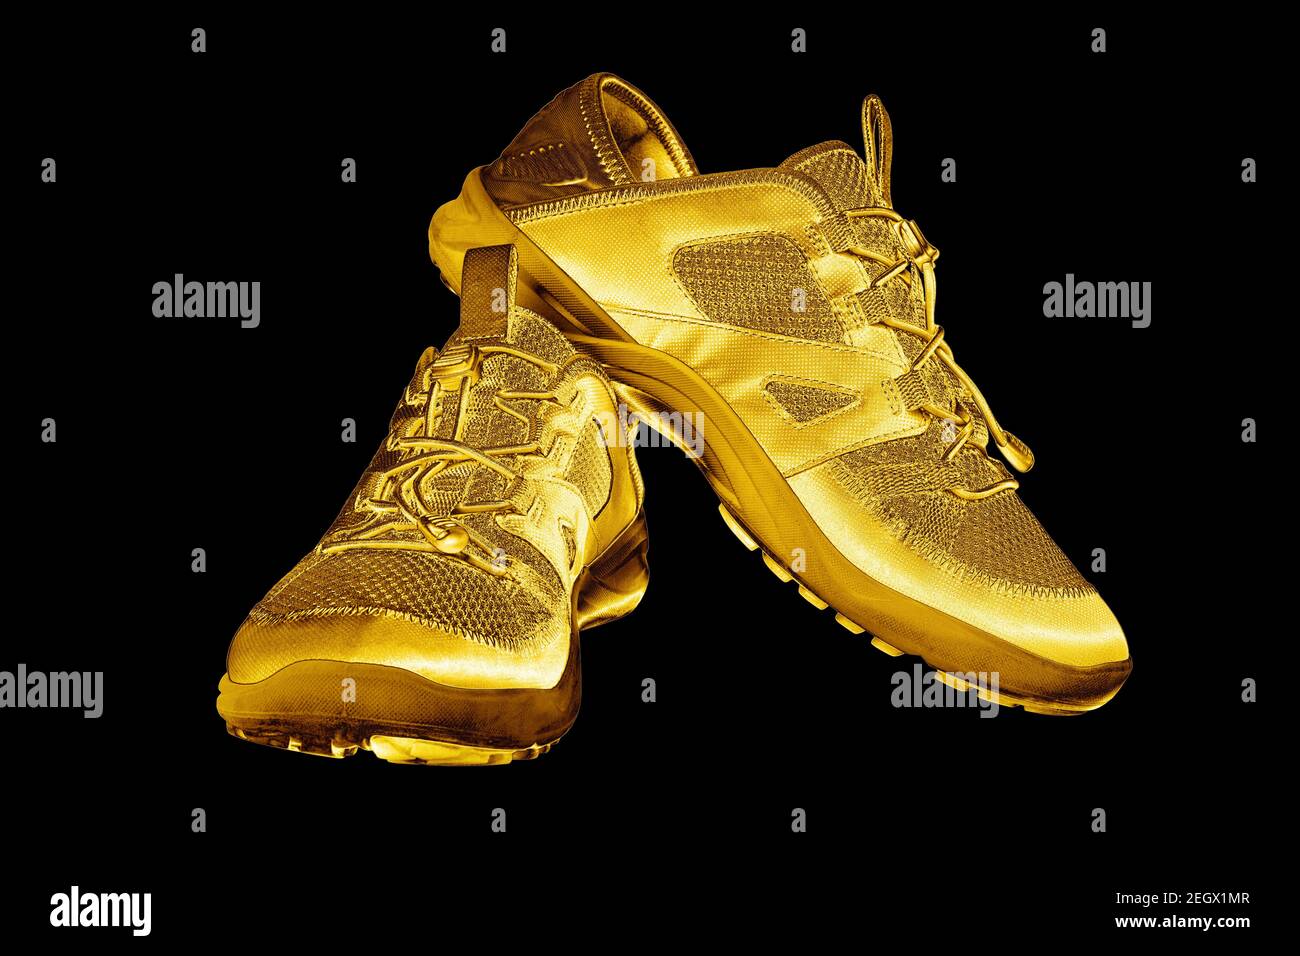 Golden sneakers black background isolated closeup, gold metal sport shoes,  luxury running gumshoes, fashion yellow metallic fitness boots, footwear  Stock Photo - Alamy